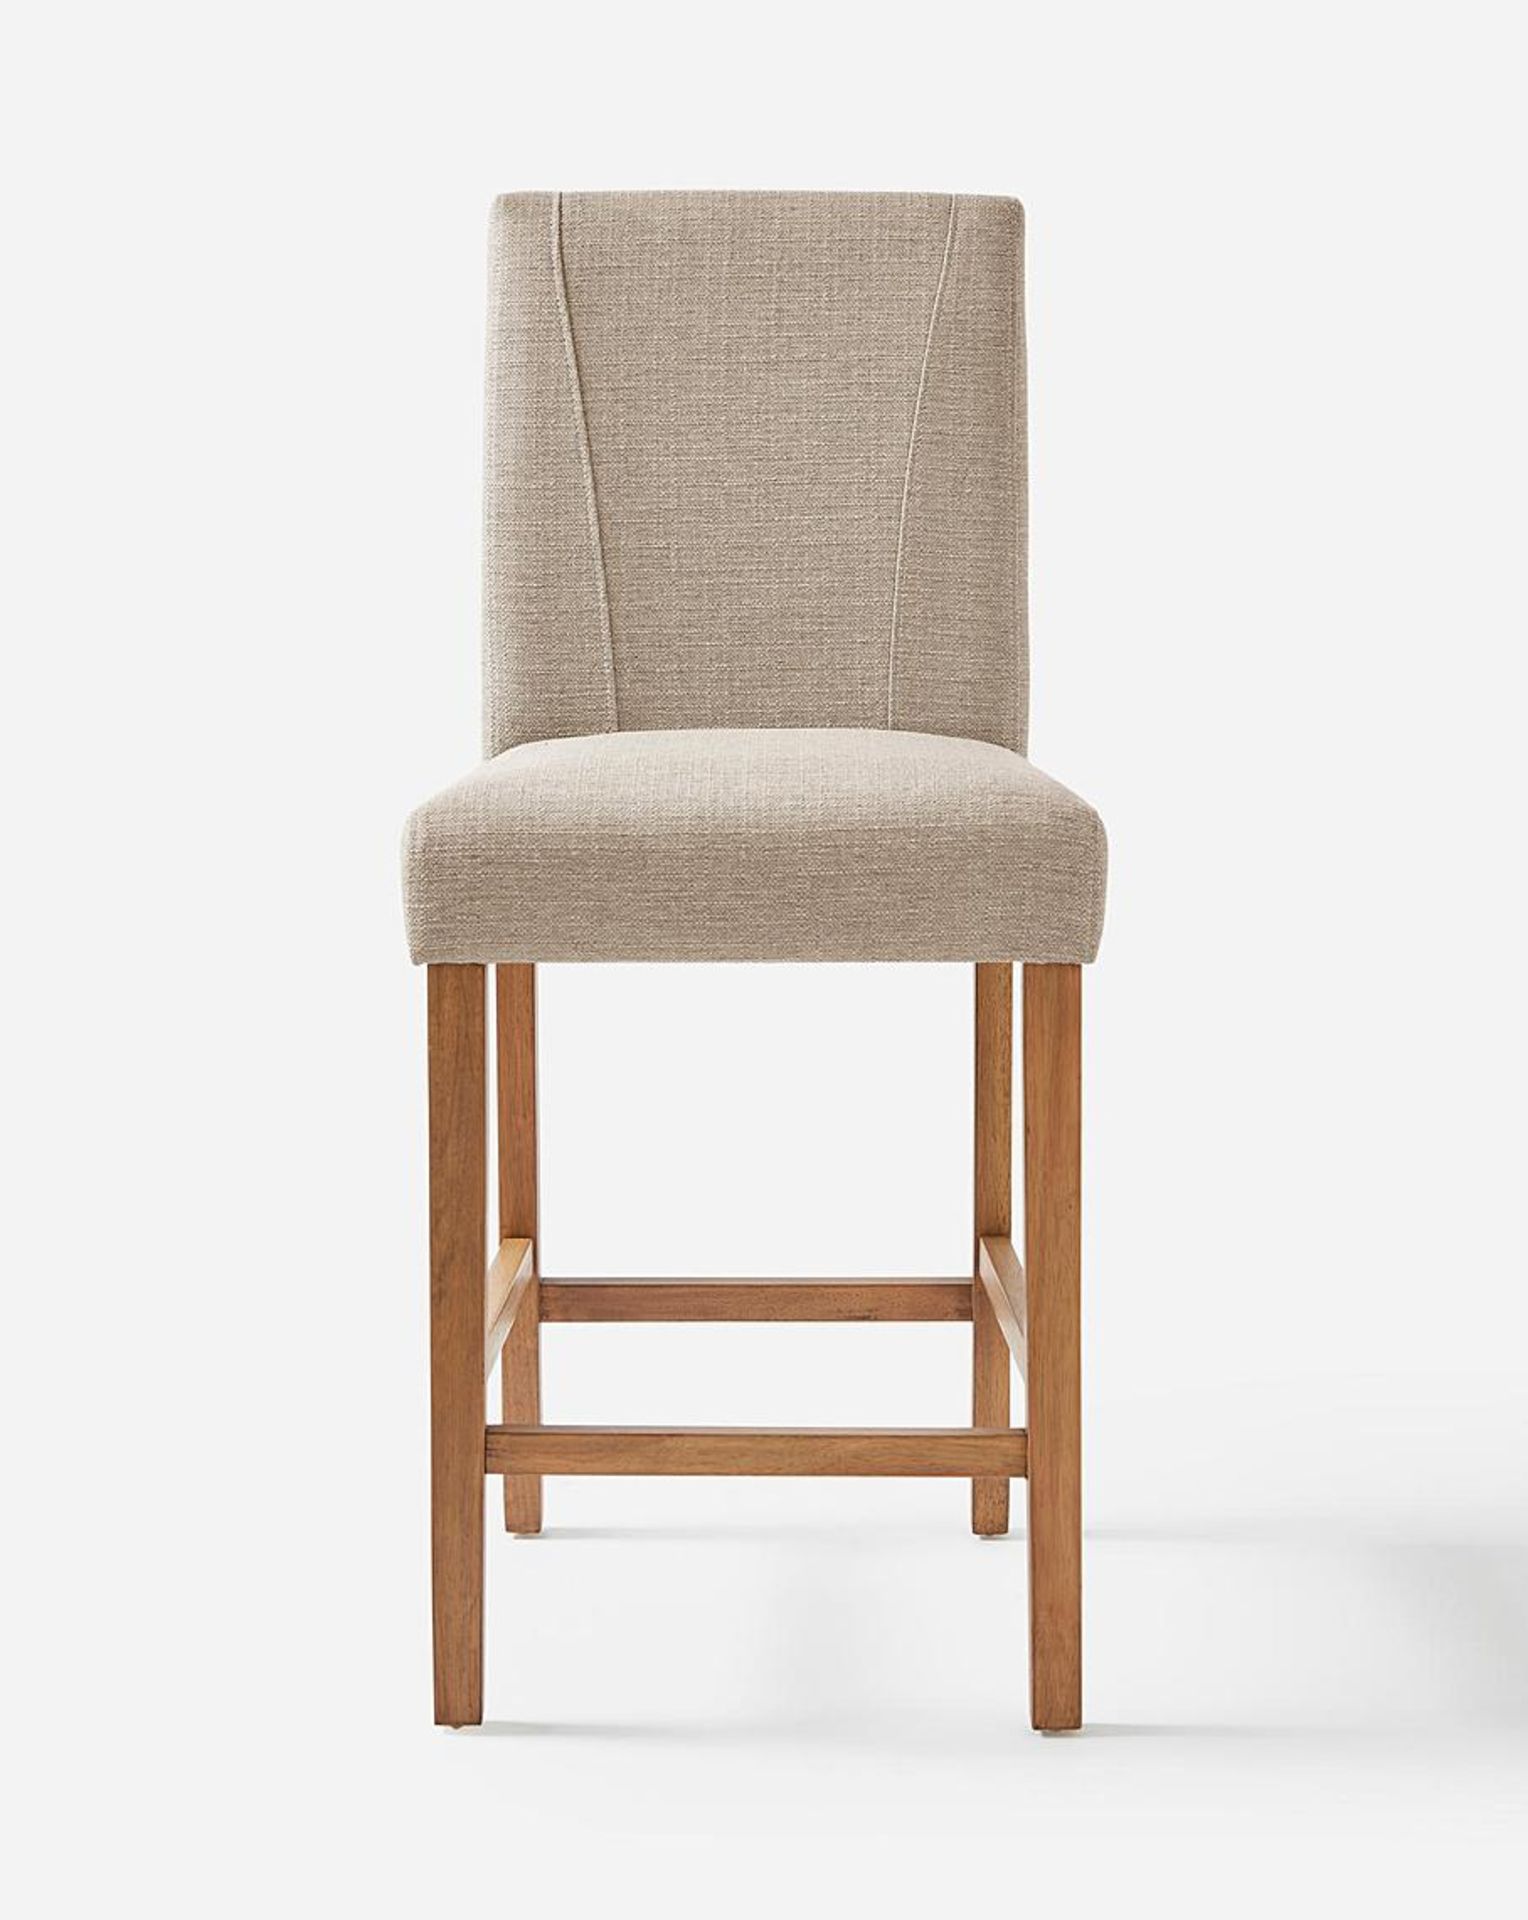 Ava Barstool. - SR4. The Ava Fabric Barstool is a classic design that has been upholstered in a